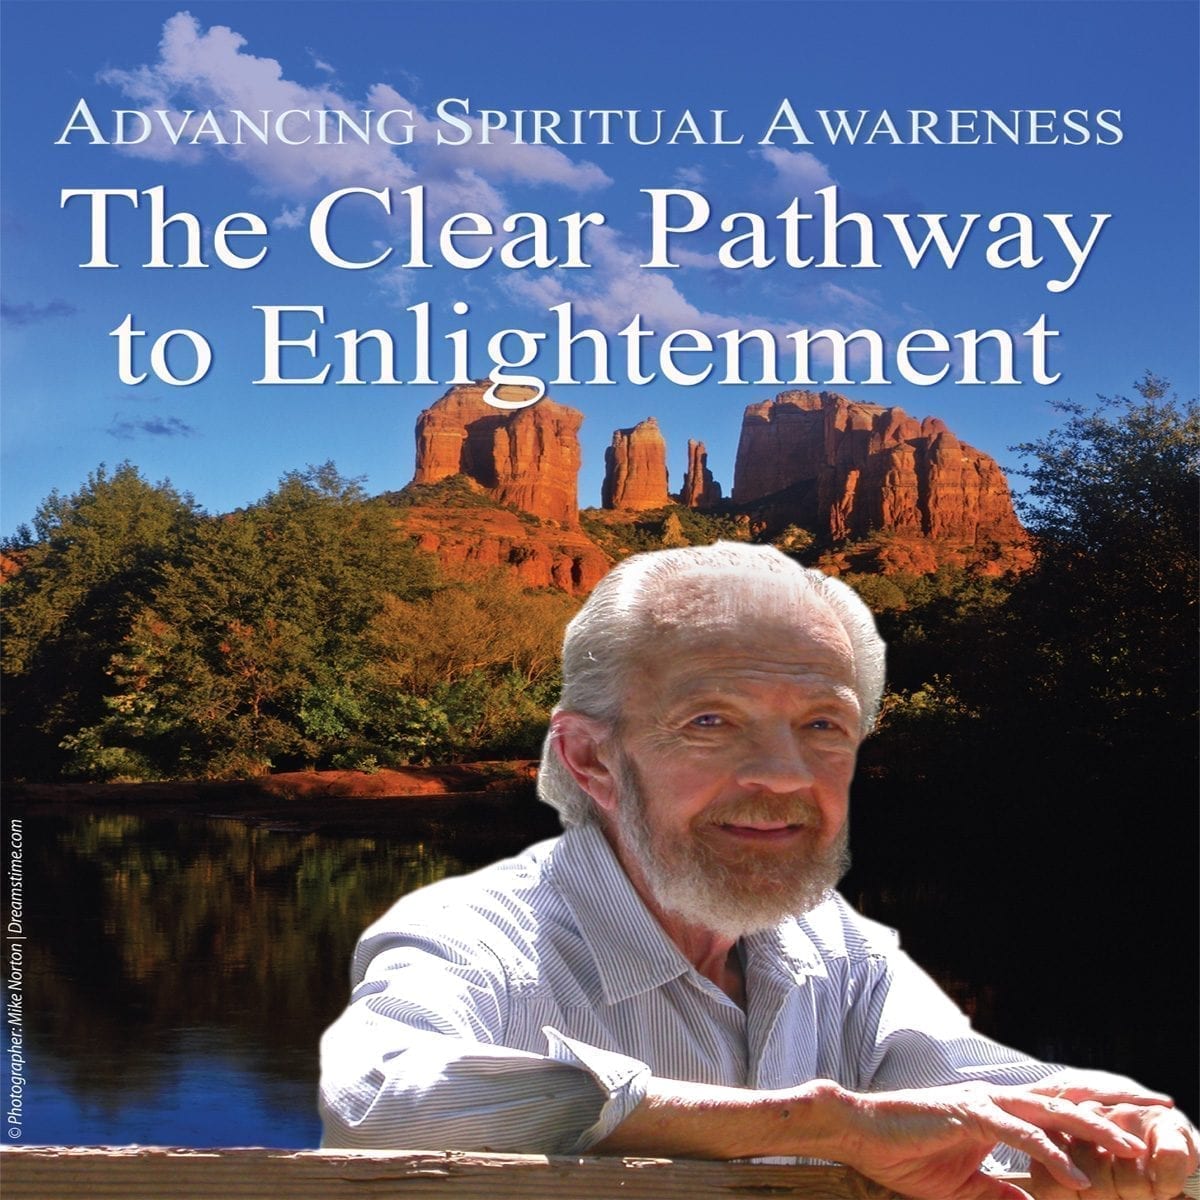 The Clear Pathway to Enlightenment (Mar 2008)